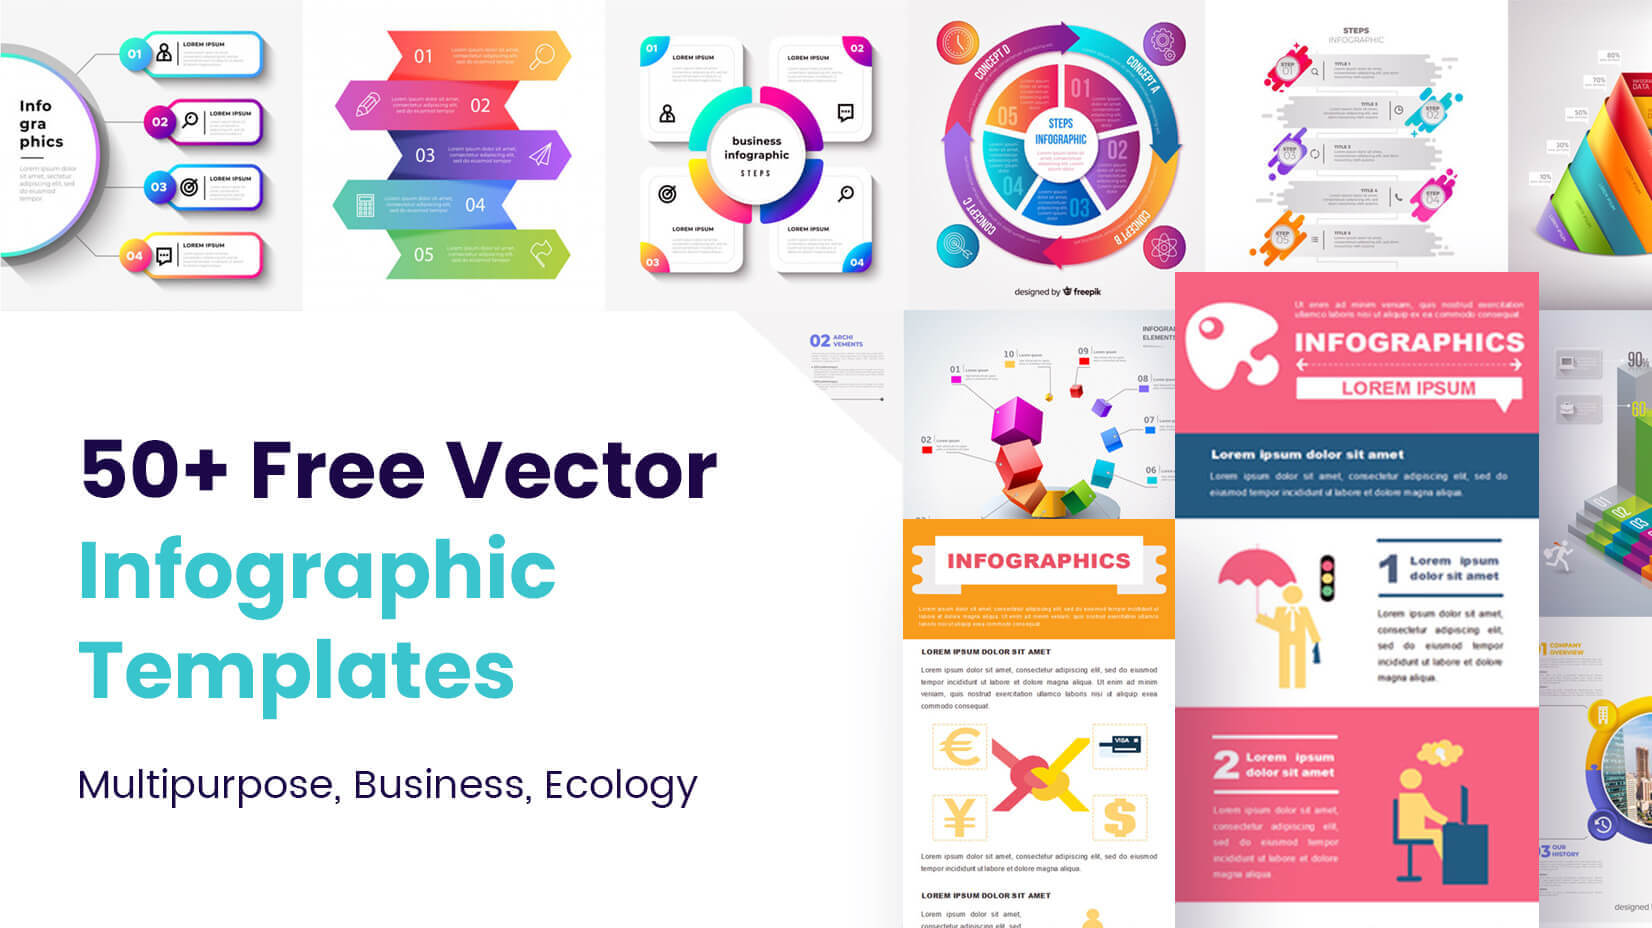 50+ Free Vector Infographic Templates: Multipurpose Throughout Business Logo Templates Free Download